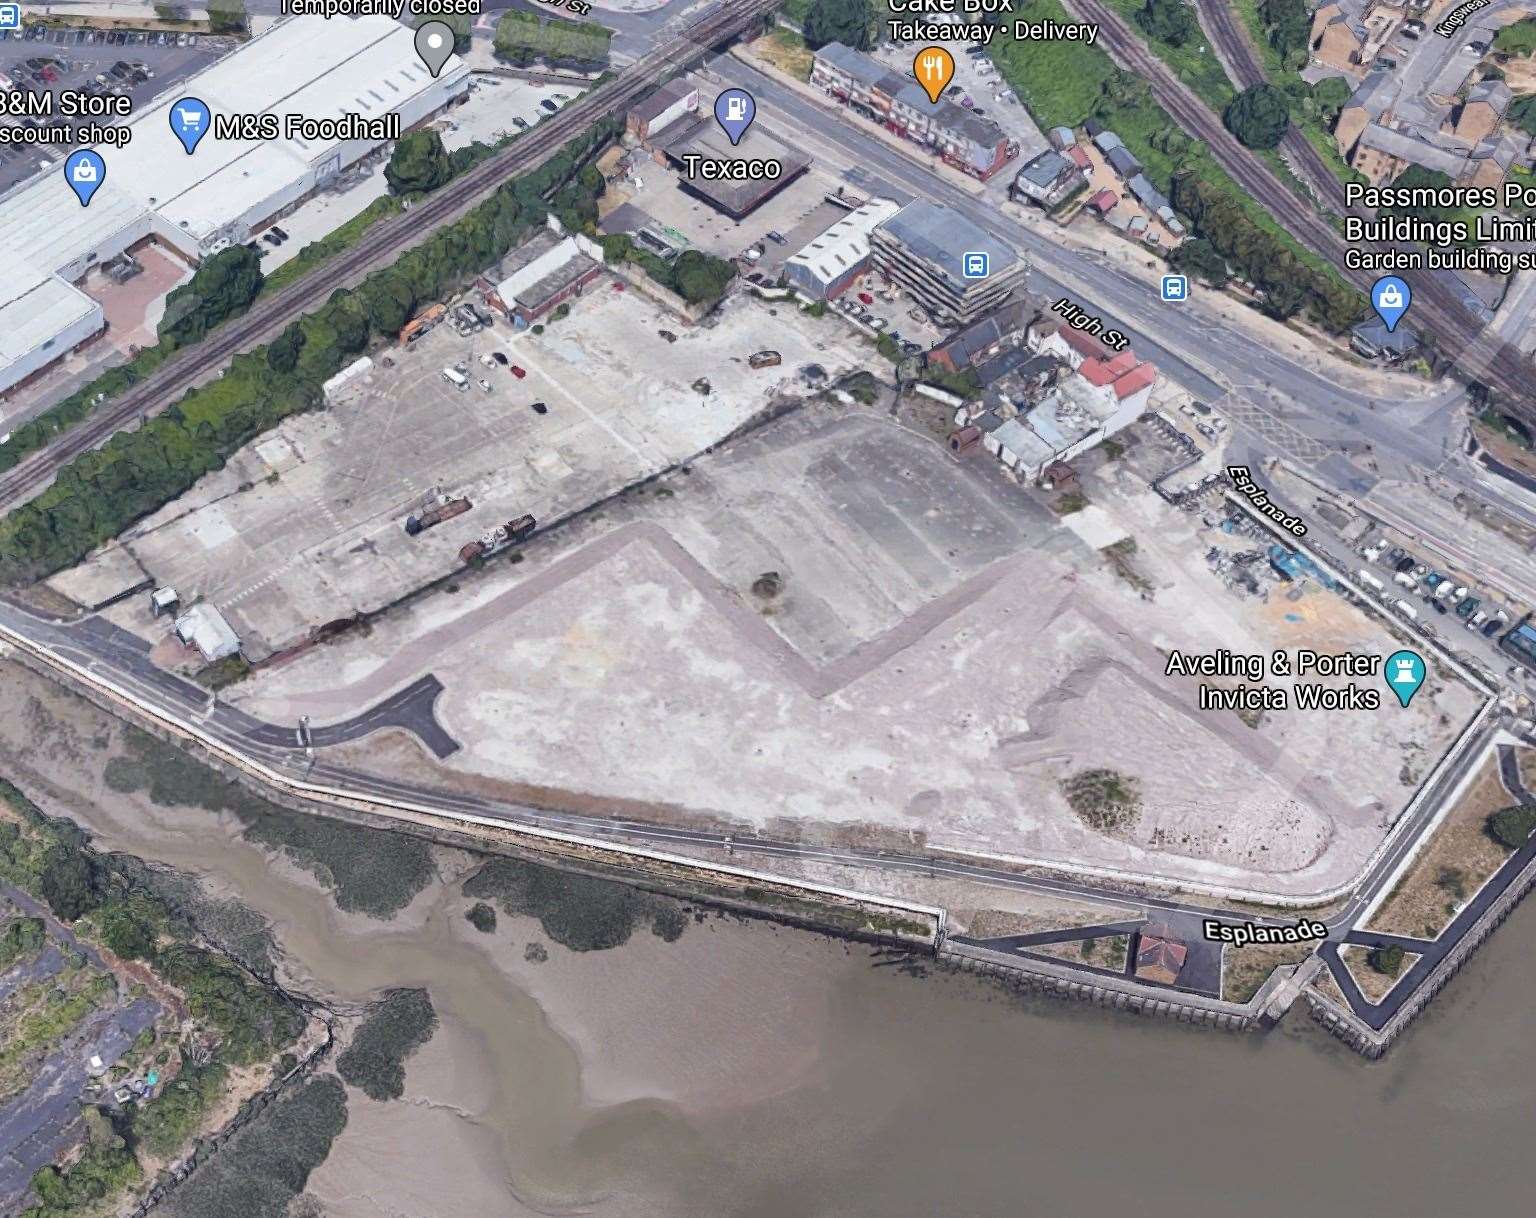 The site of the former civic centre in Strood. Picture: Google Maps